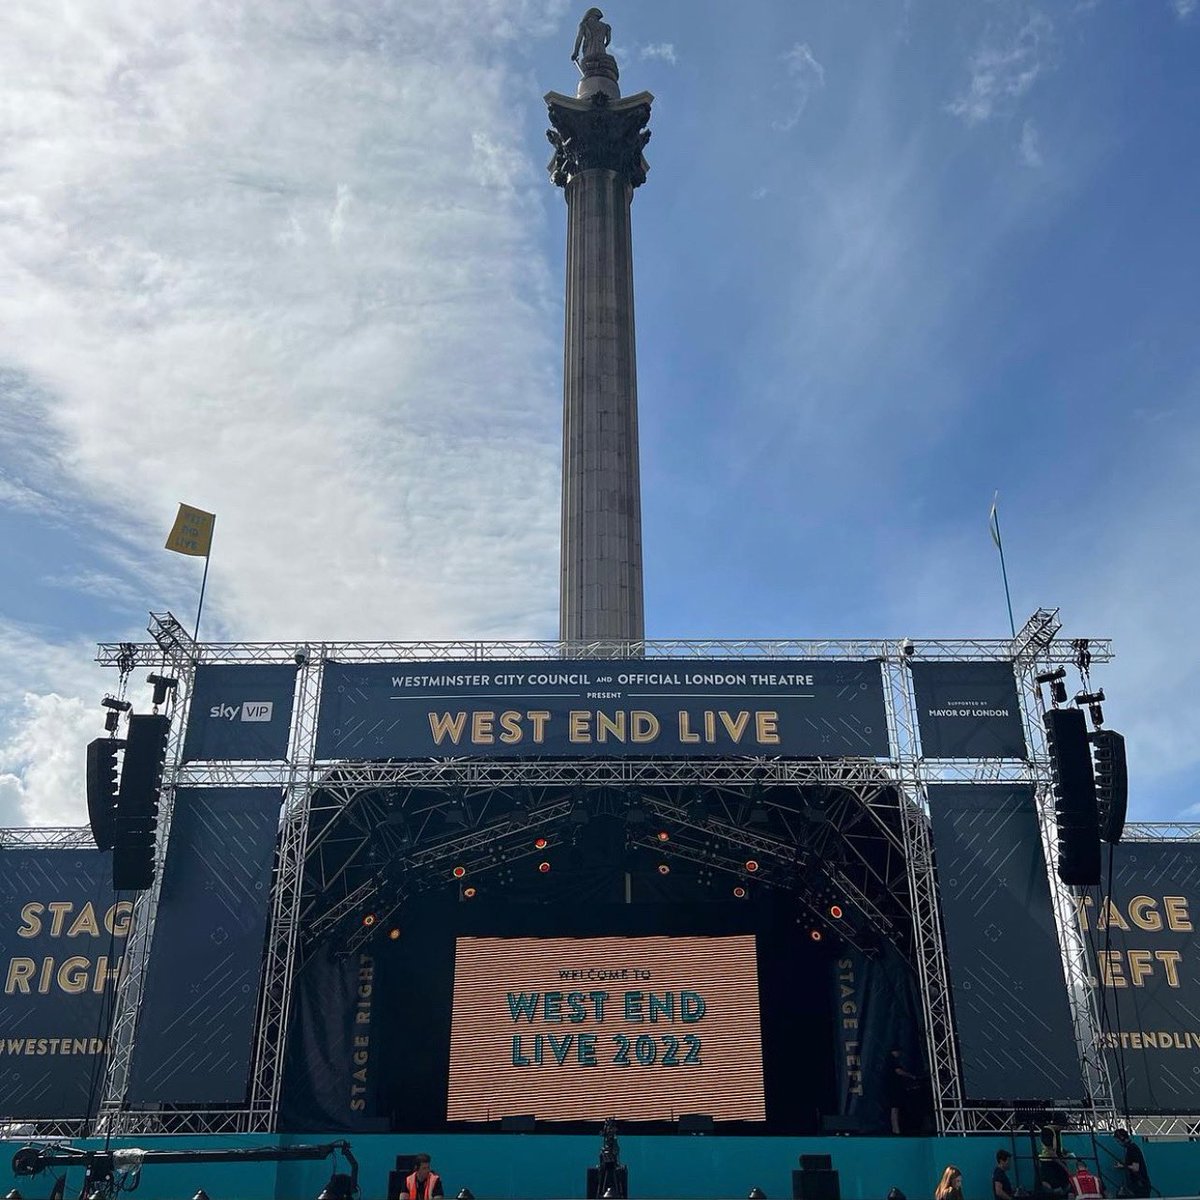 It’s #WestEndLive weekend! 🤩 Make sure to head down to Trafalgar Square this weekend for a chance to see performances from all your favourite musicals for free 🎭 Huge thanks to @london_theatre for putting on this weekend’s entertainment! 👏🏻 📸 @WestEndLIVE